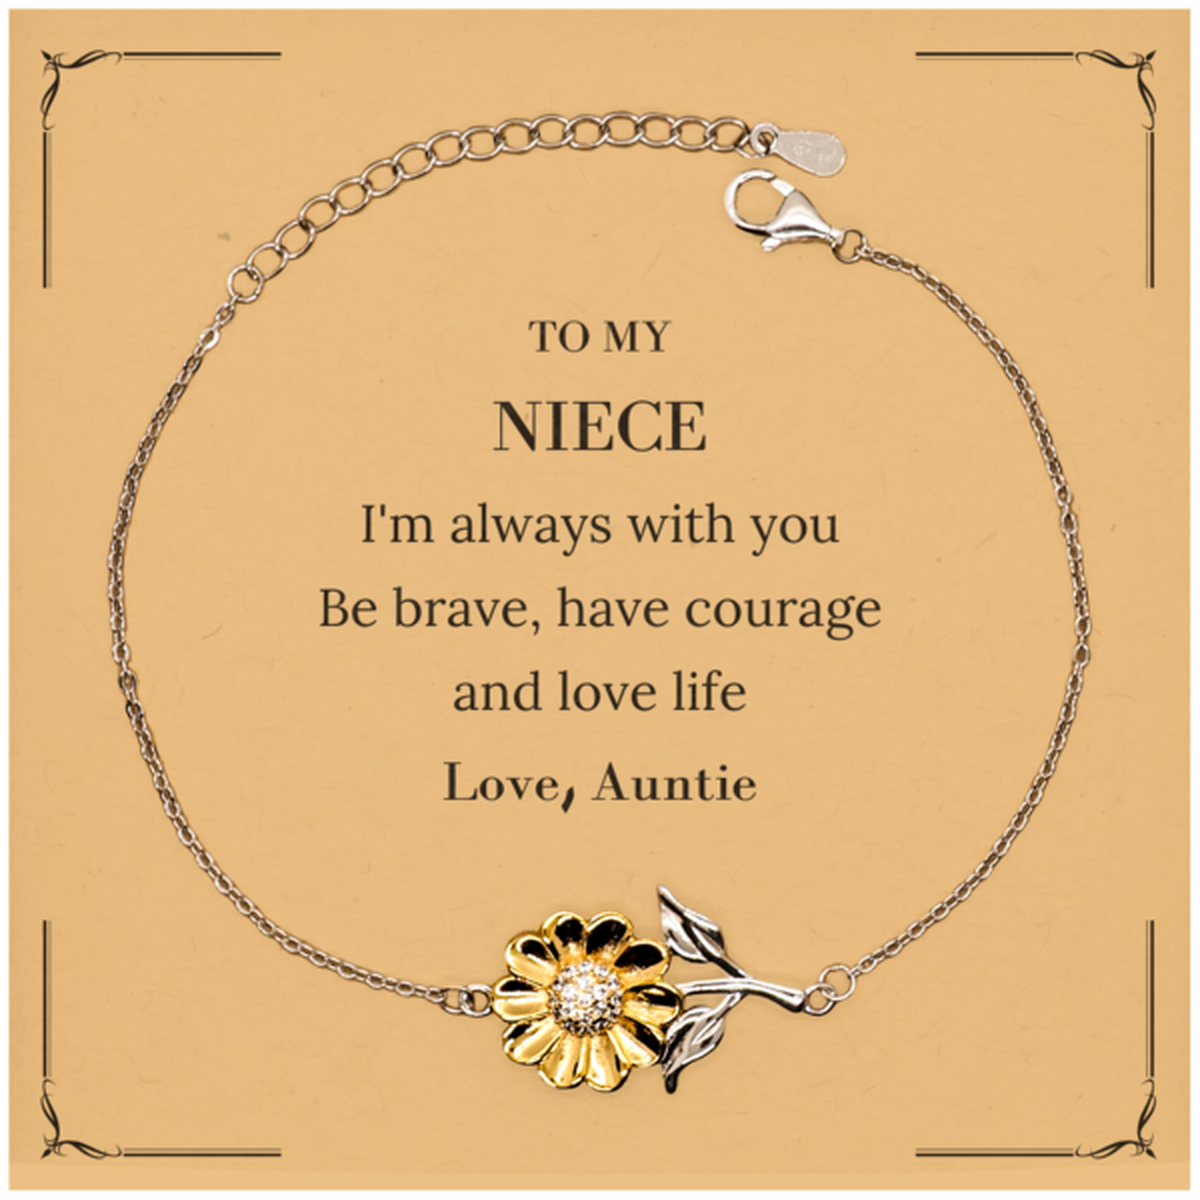 To My Niece Gifts from Auntie, Unique Sunflower Bracelet Inspirational Christmas Birthday Graduation Gifts for Niece I'm always with you. Be brave, have courage and love life. Love, Auntie